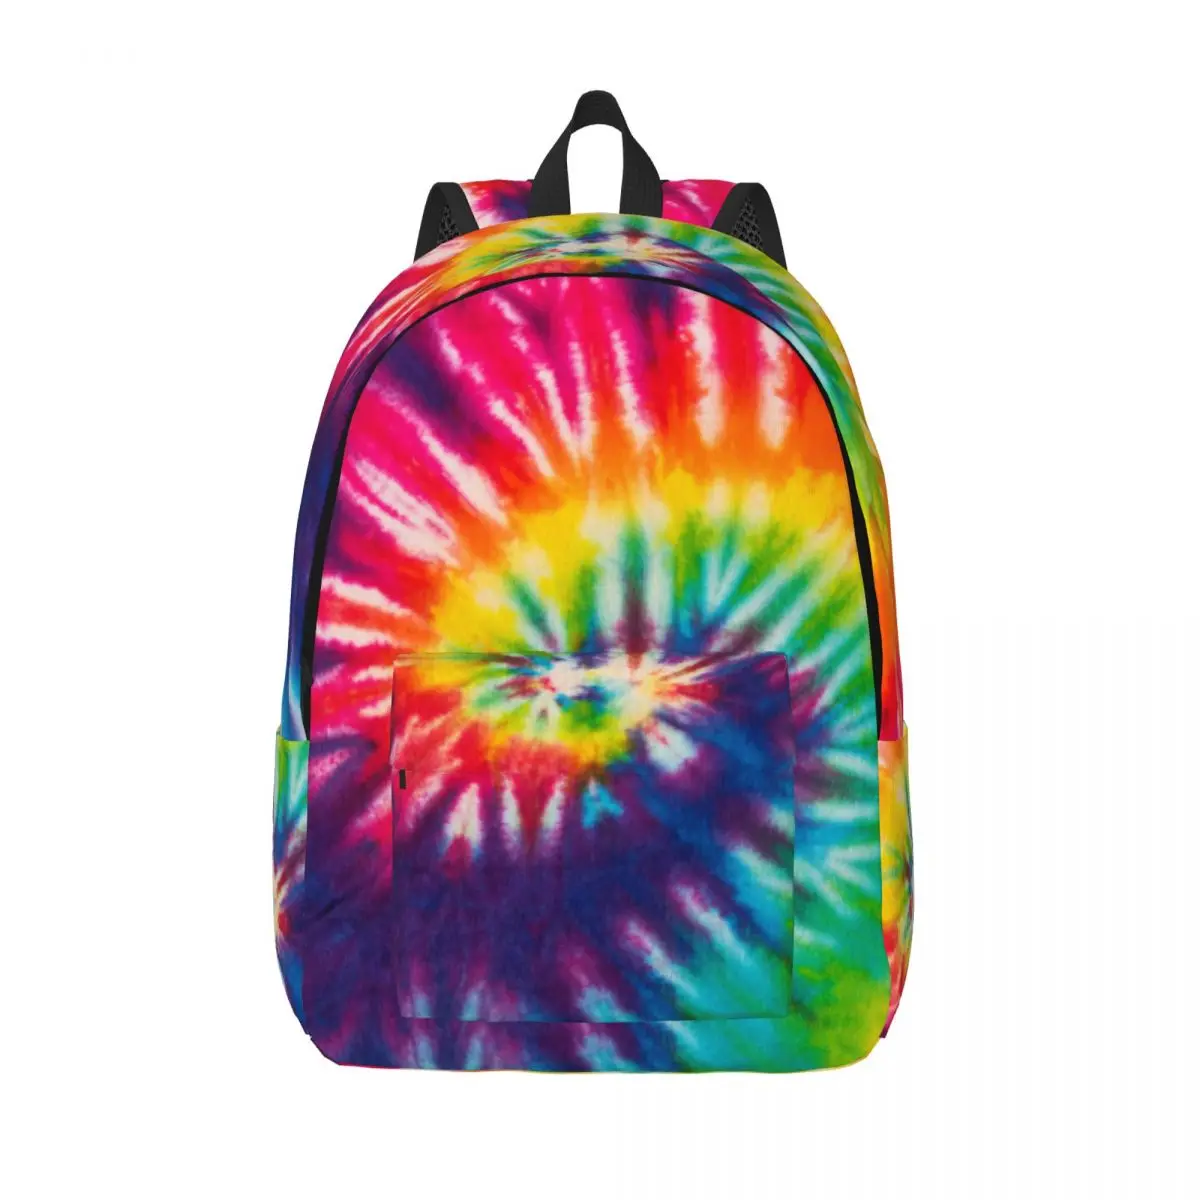 

Abstract Swirl Tie Dye Backpack for Men Women Fashion High School Work Daypack Laptop Canvas Bags Outdoor